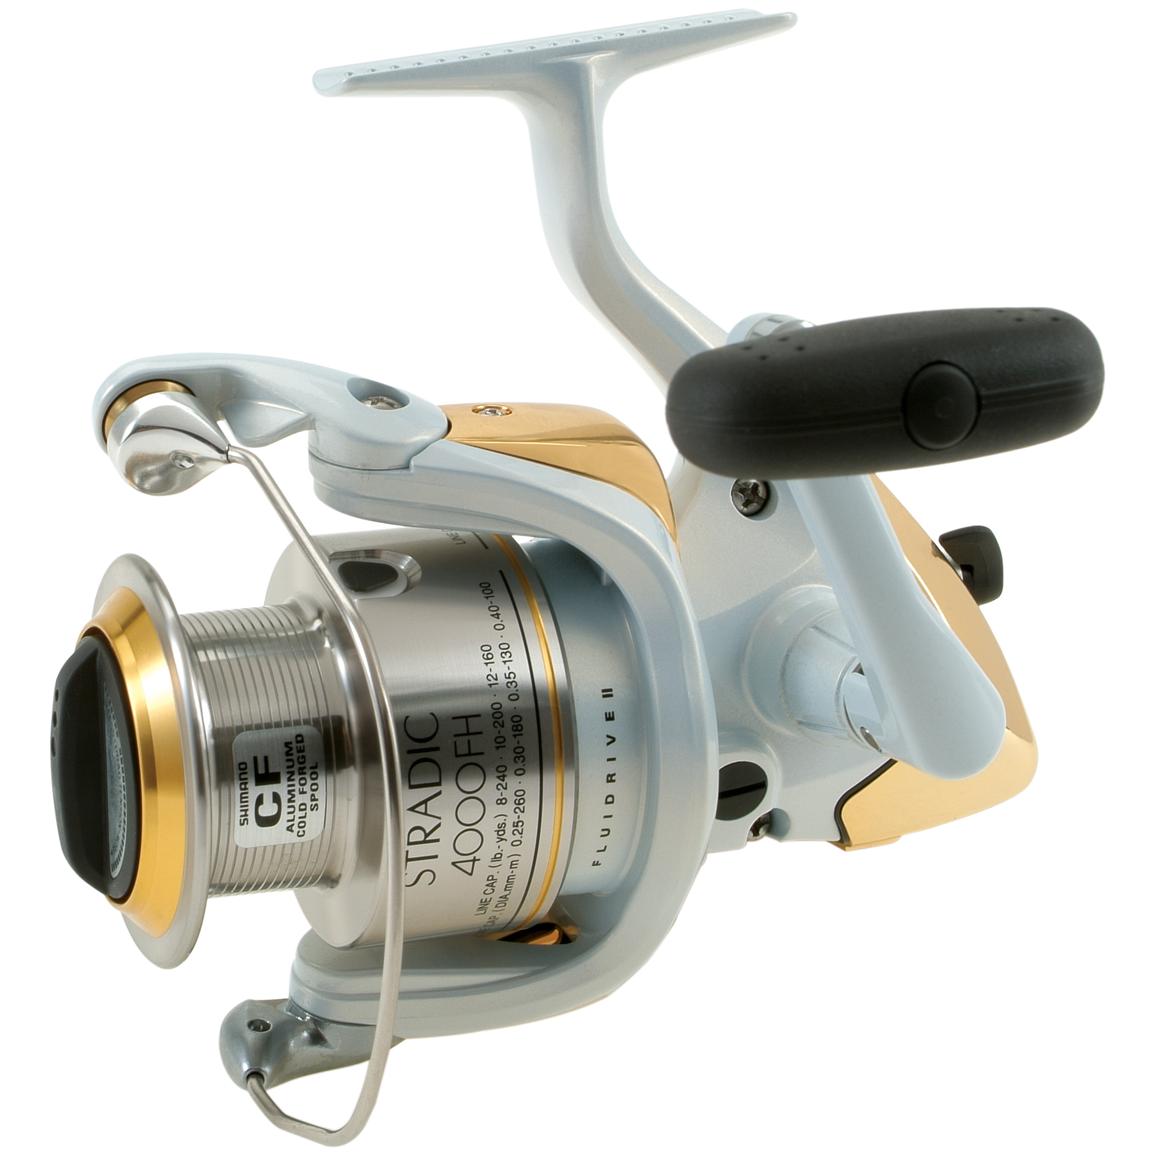 Shimano Stradic 5000fh Spinning Fishing Reel White Fluidrive II for sale online 